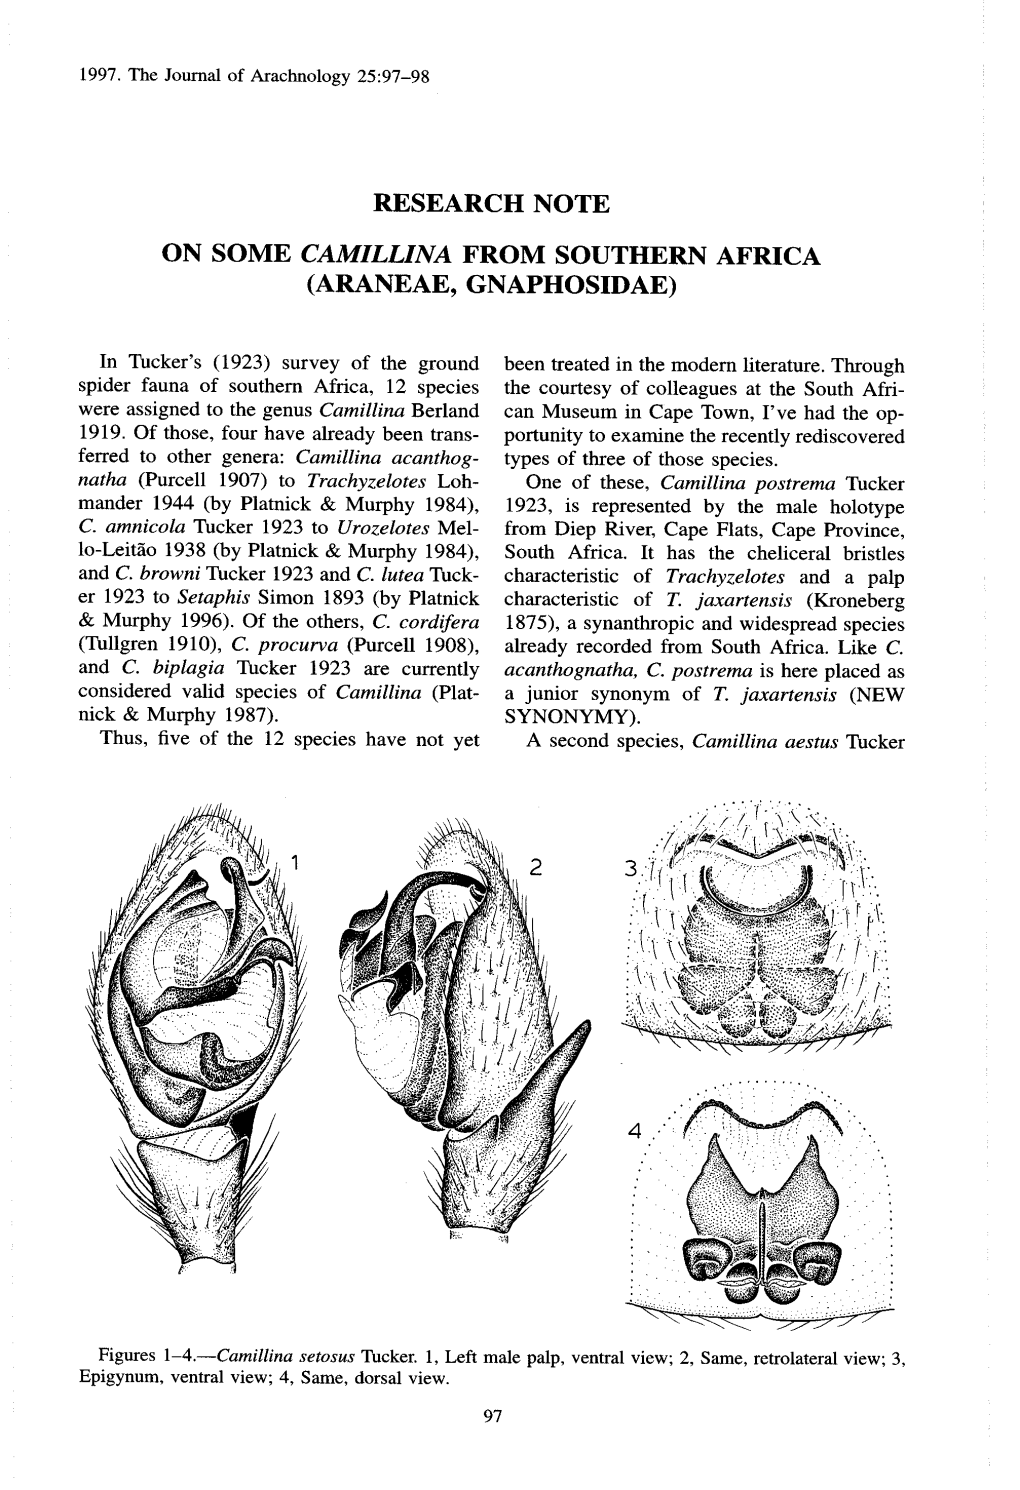 Research Note on Some Camillina from Southern